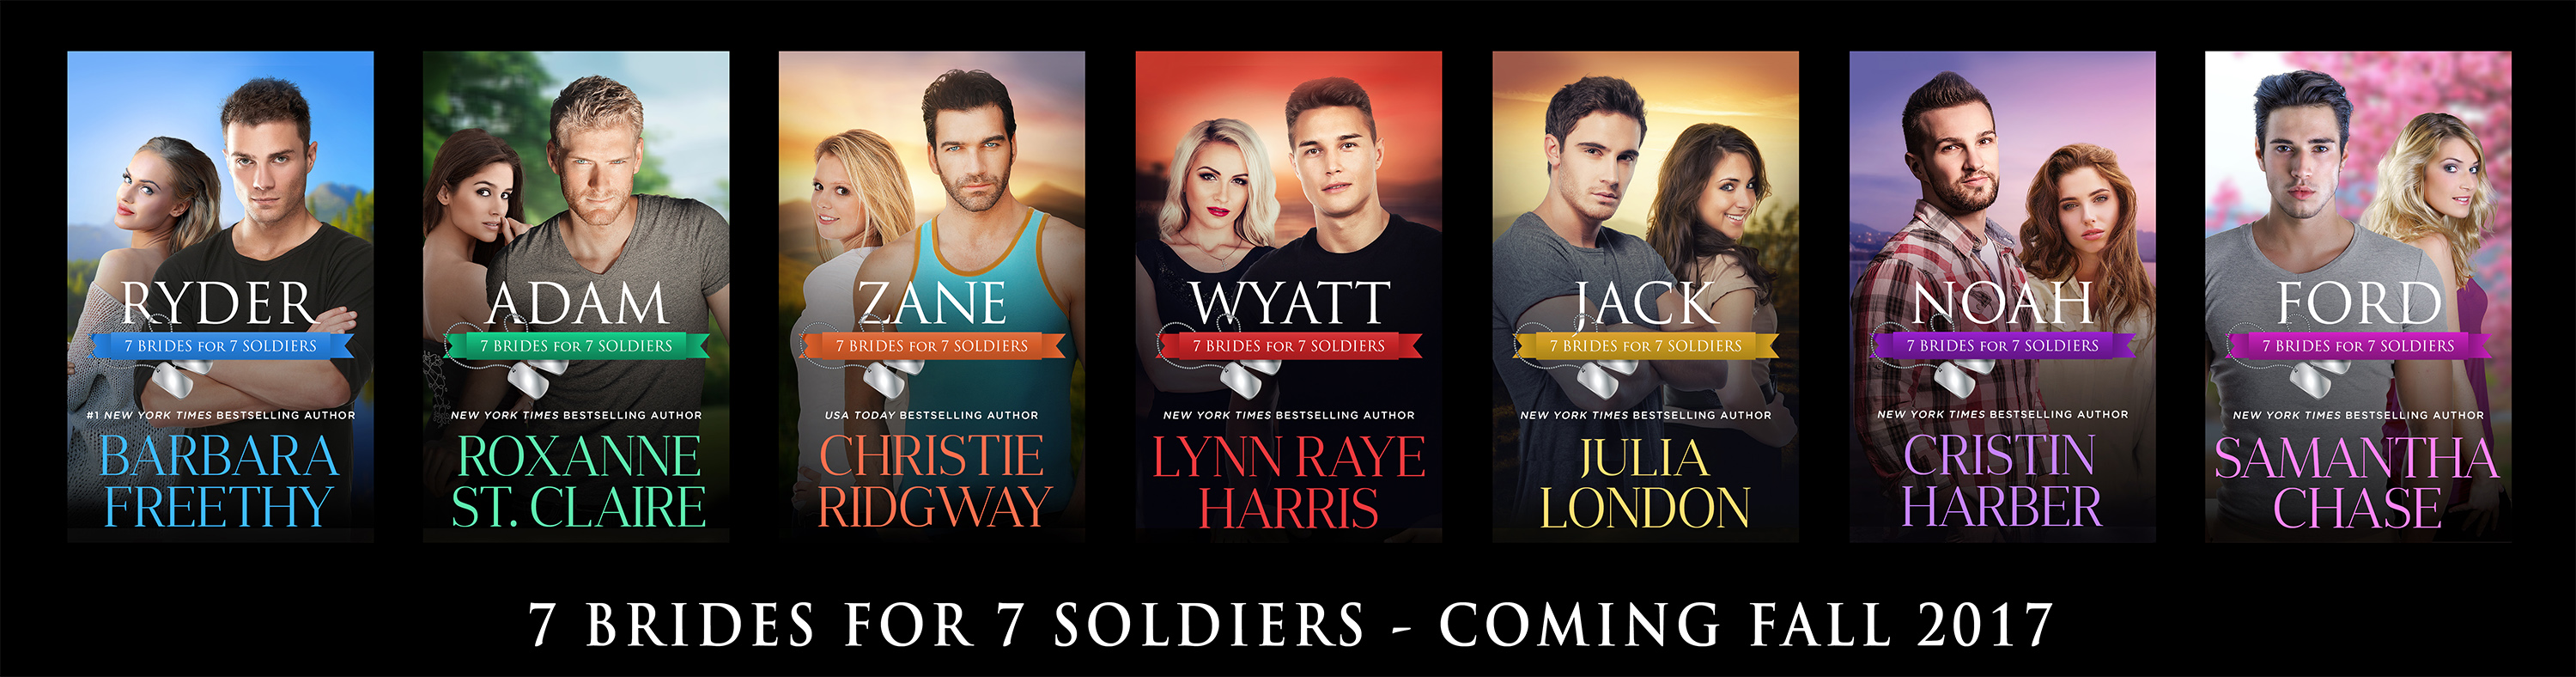 7 Brides for 7 Soldiers series cover reveal